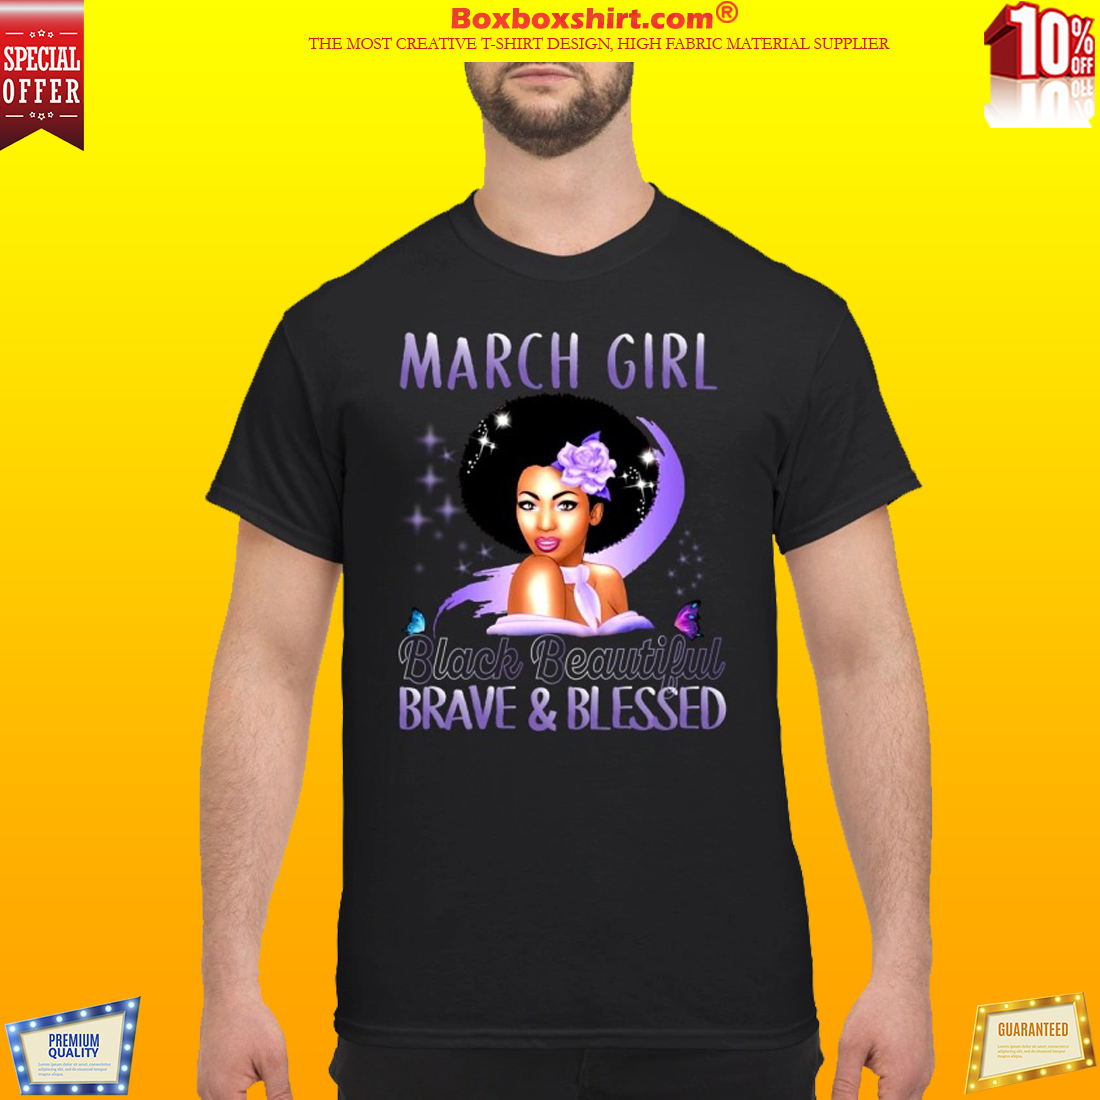 March girl black beautiful brave and blessed classic shirt